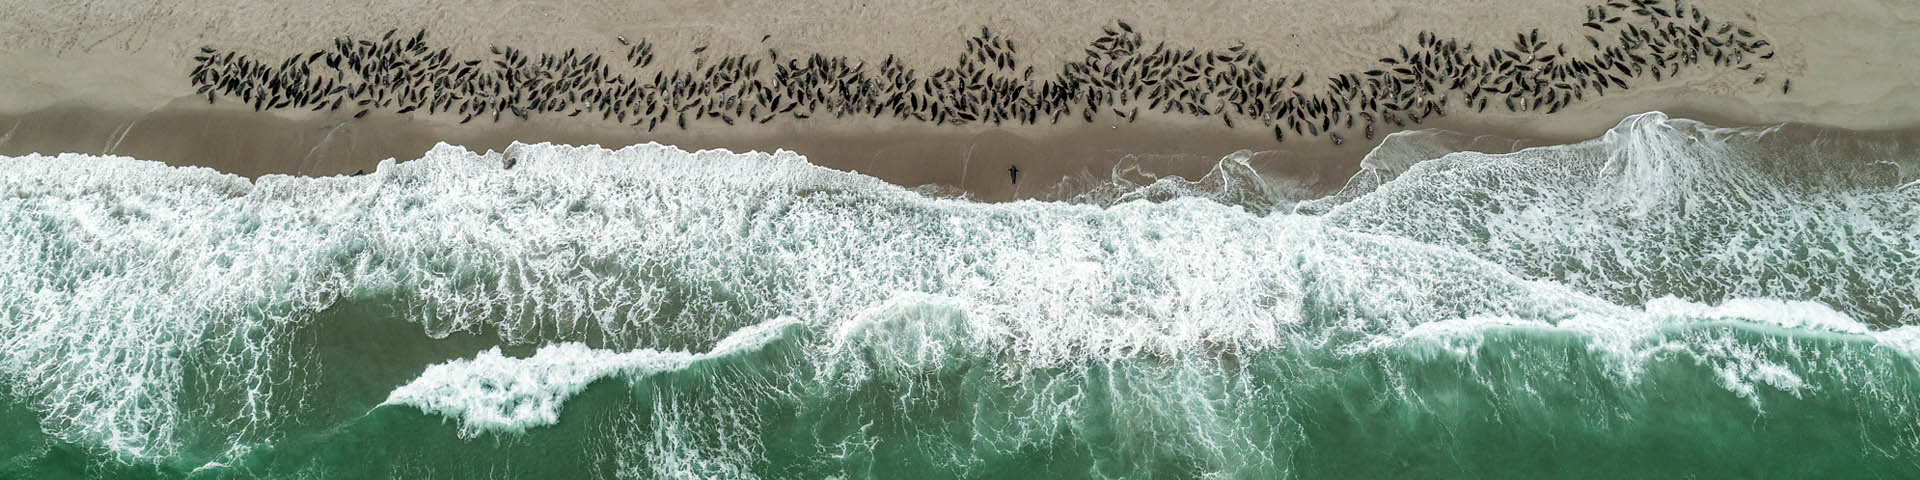  An aerial photo showing hundreds of seals gathered on the sandy beach as waves crash on the shore.